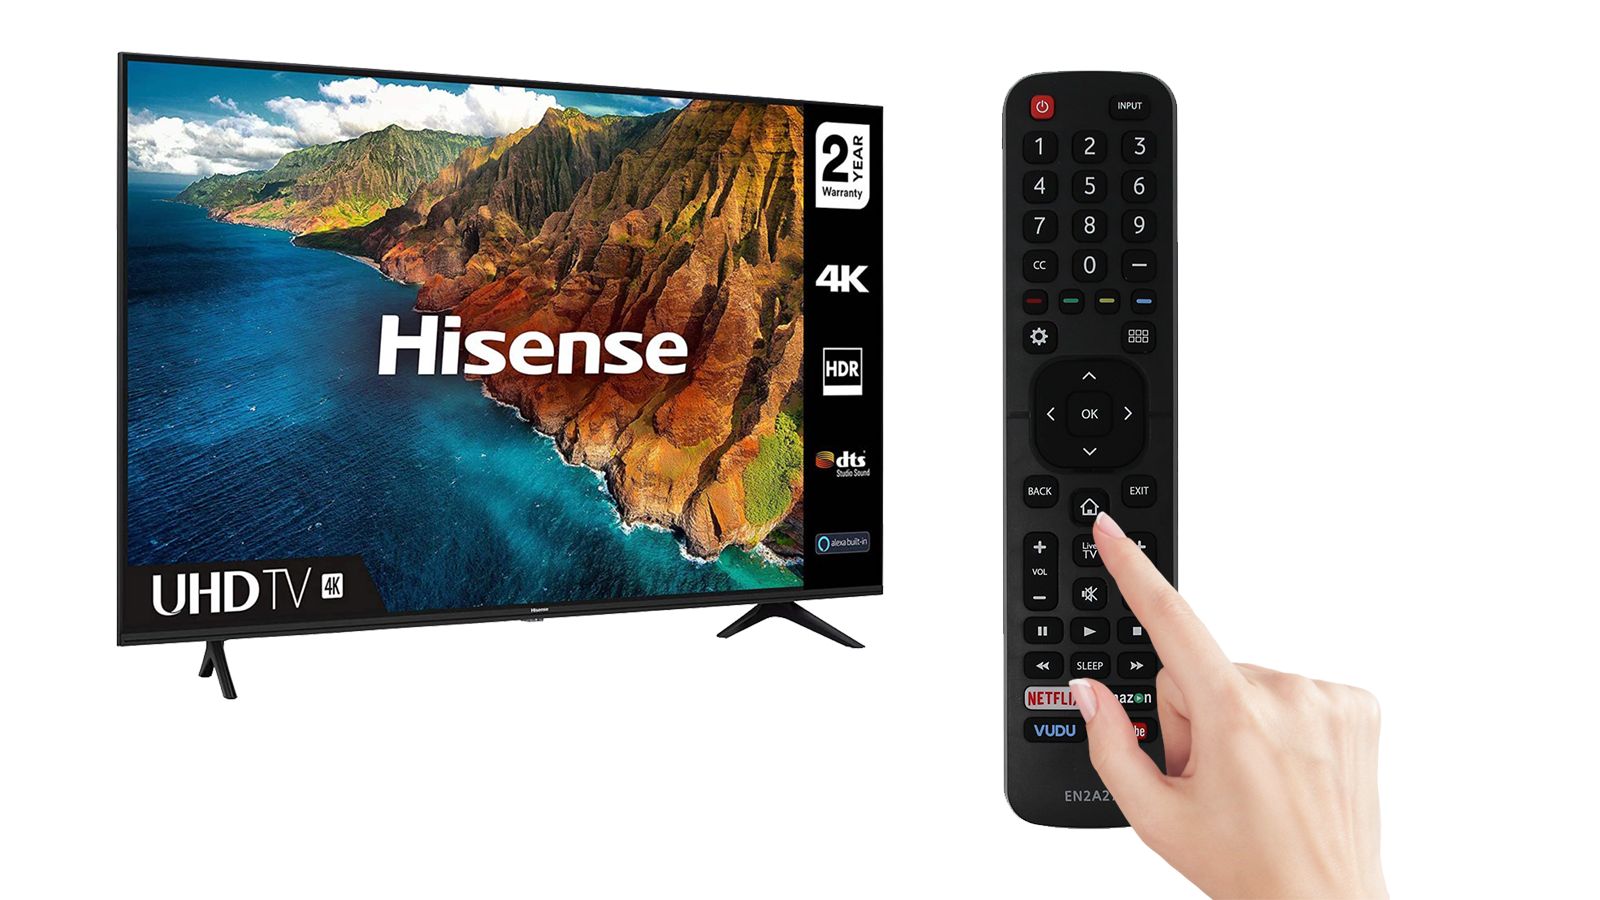 How To Turn Off Dolby Vision On Hisense Smart TV